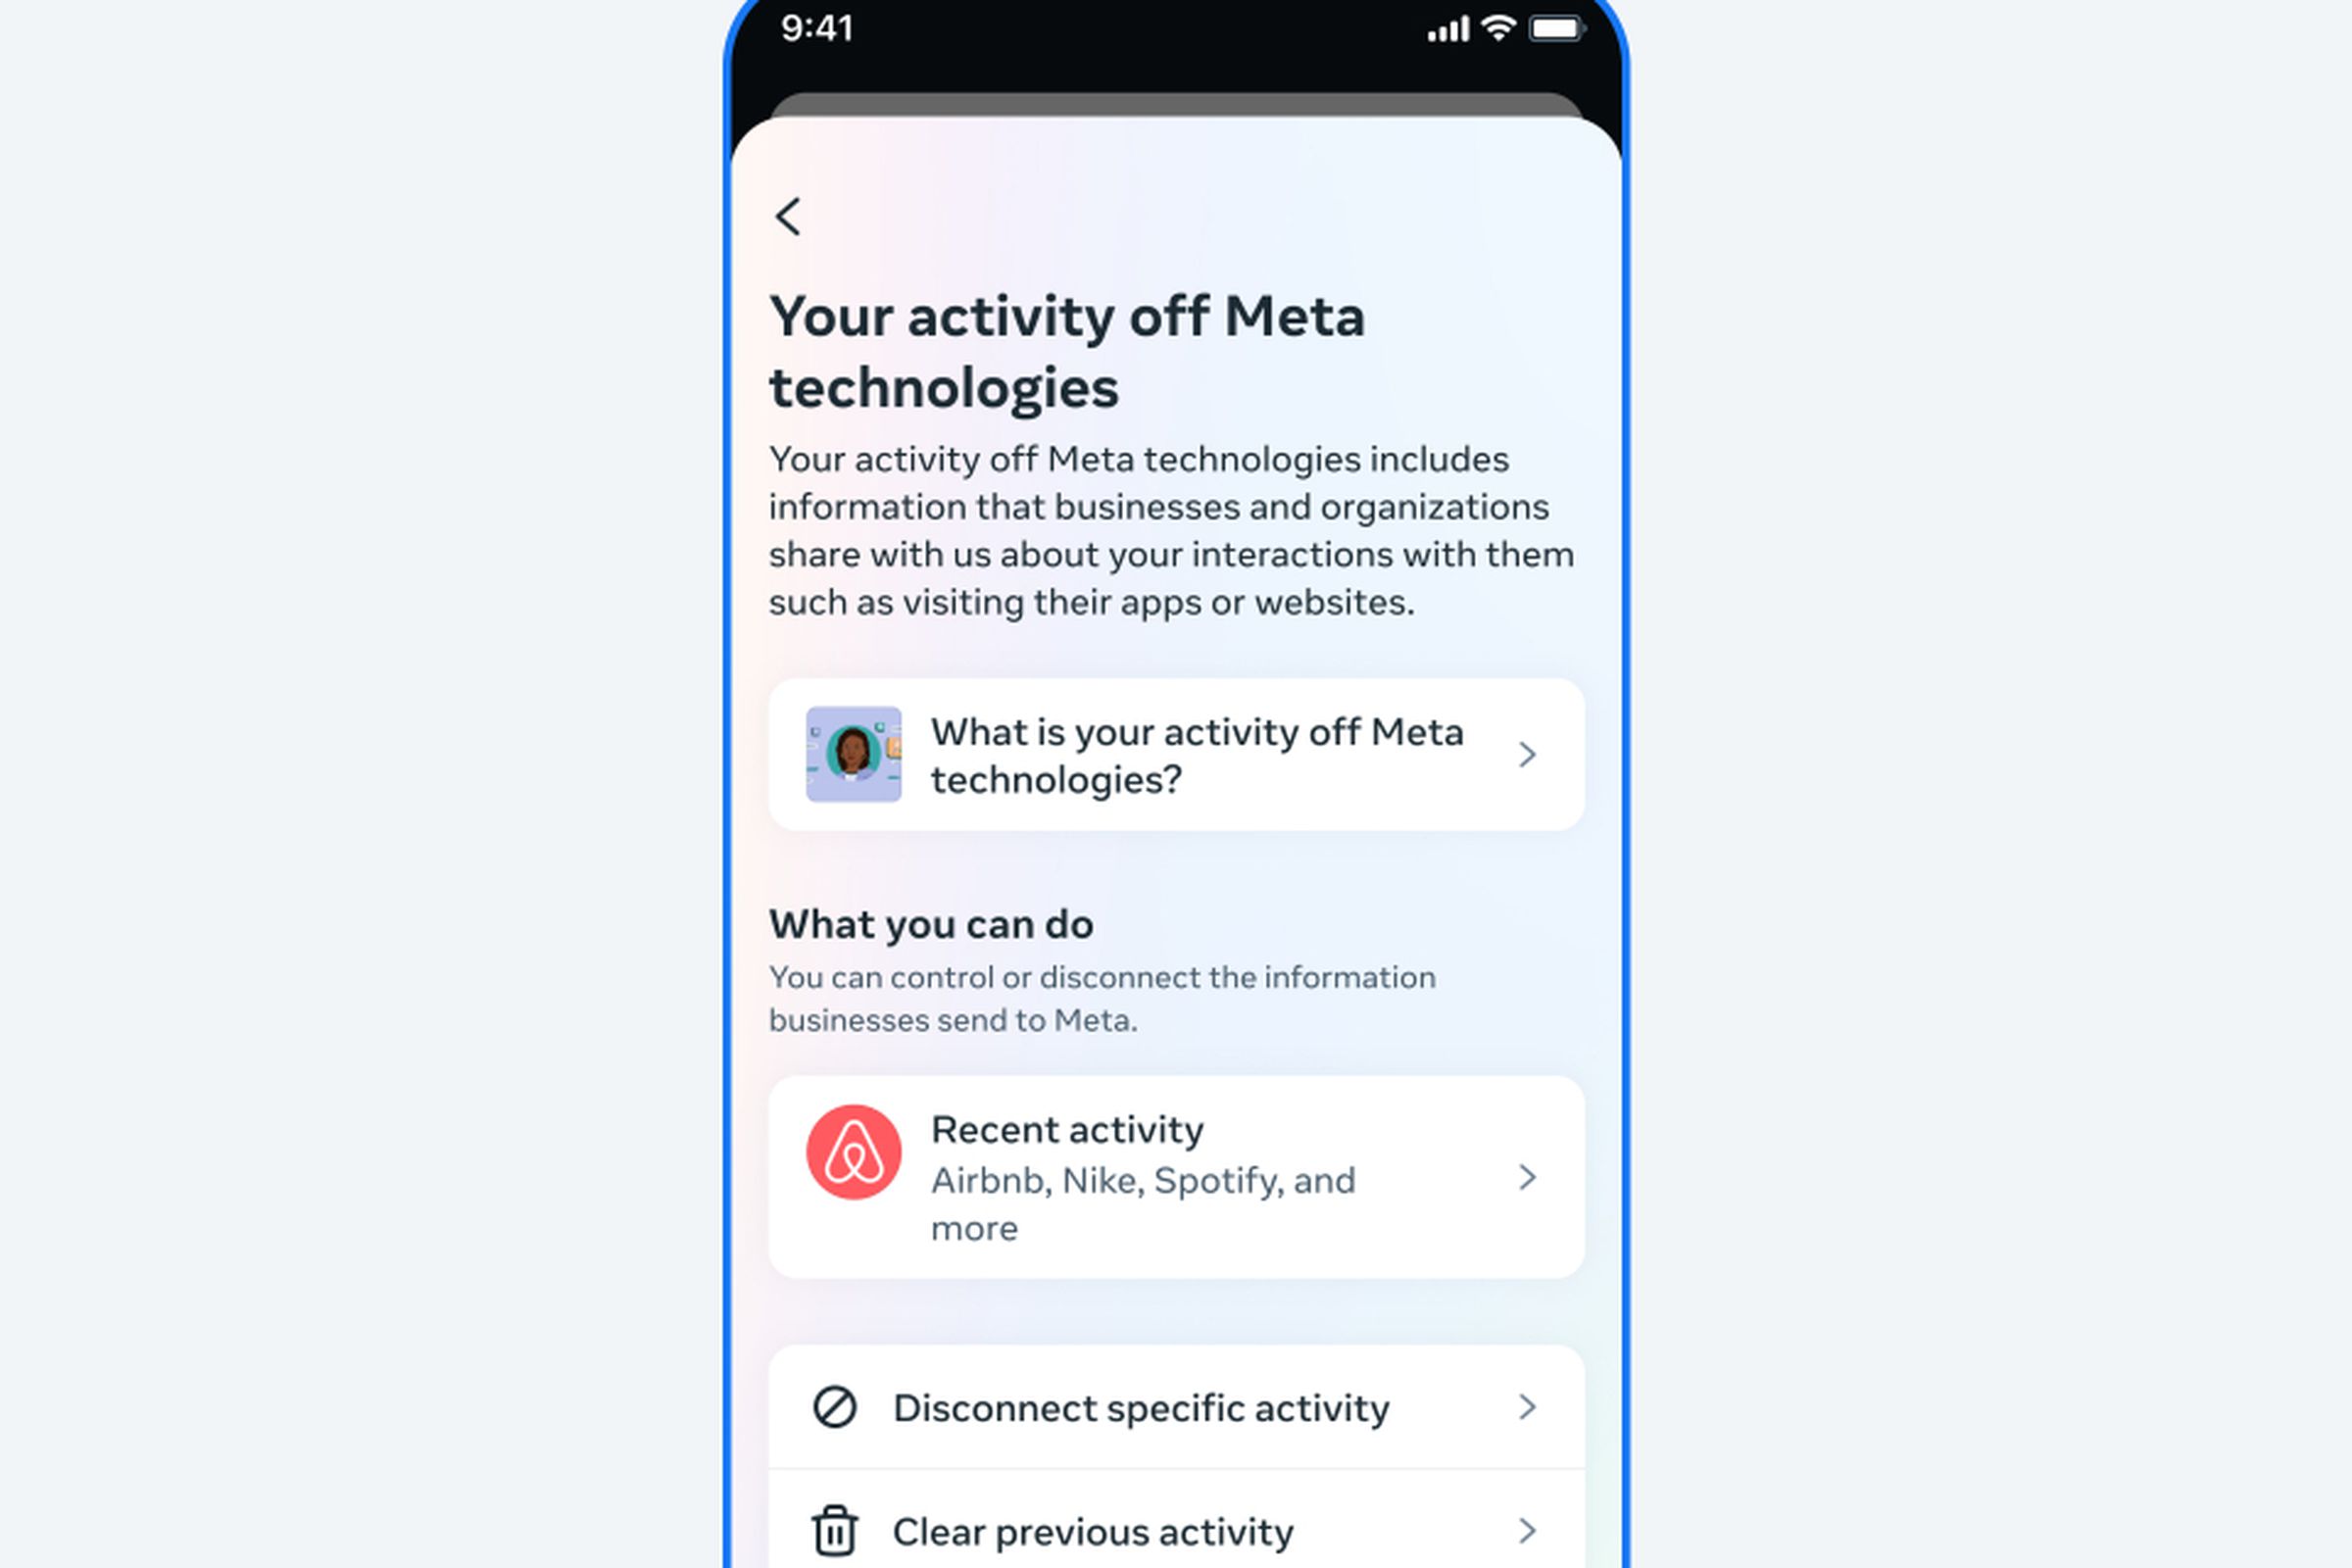 An image showing the “Your activities off Meta” feature within the Accounts Center